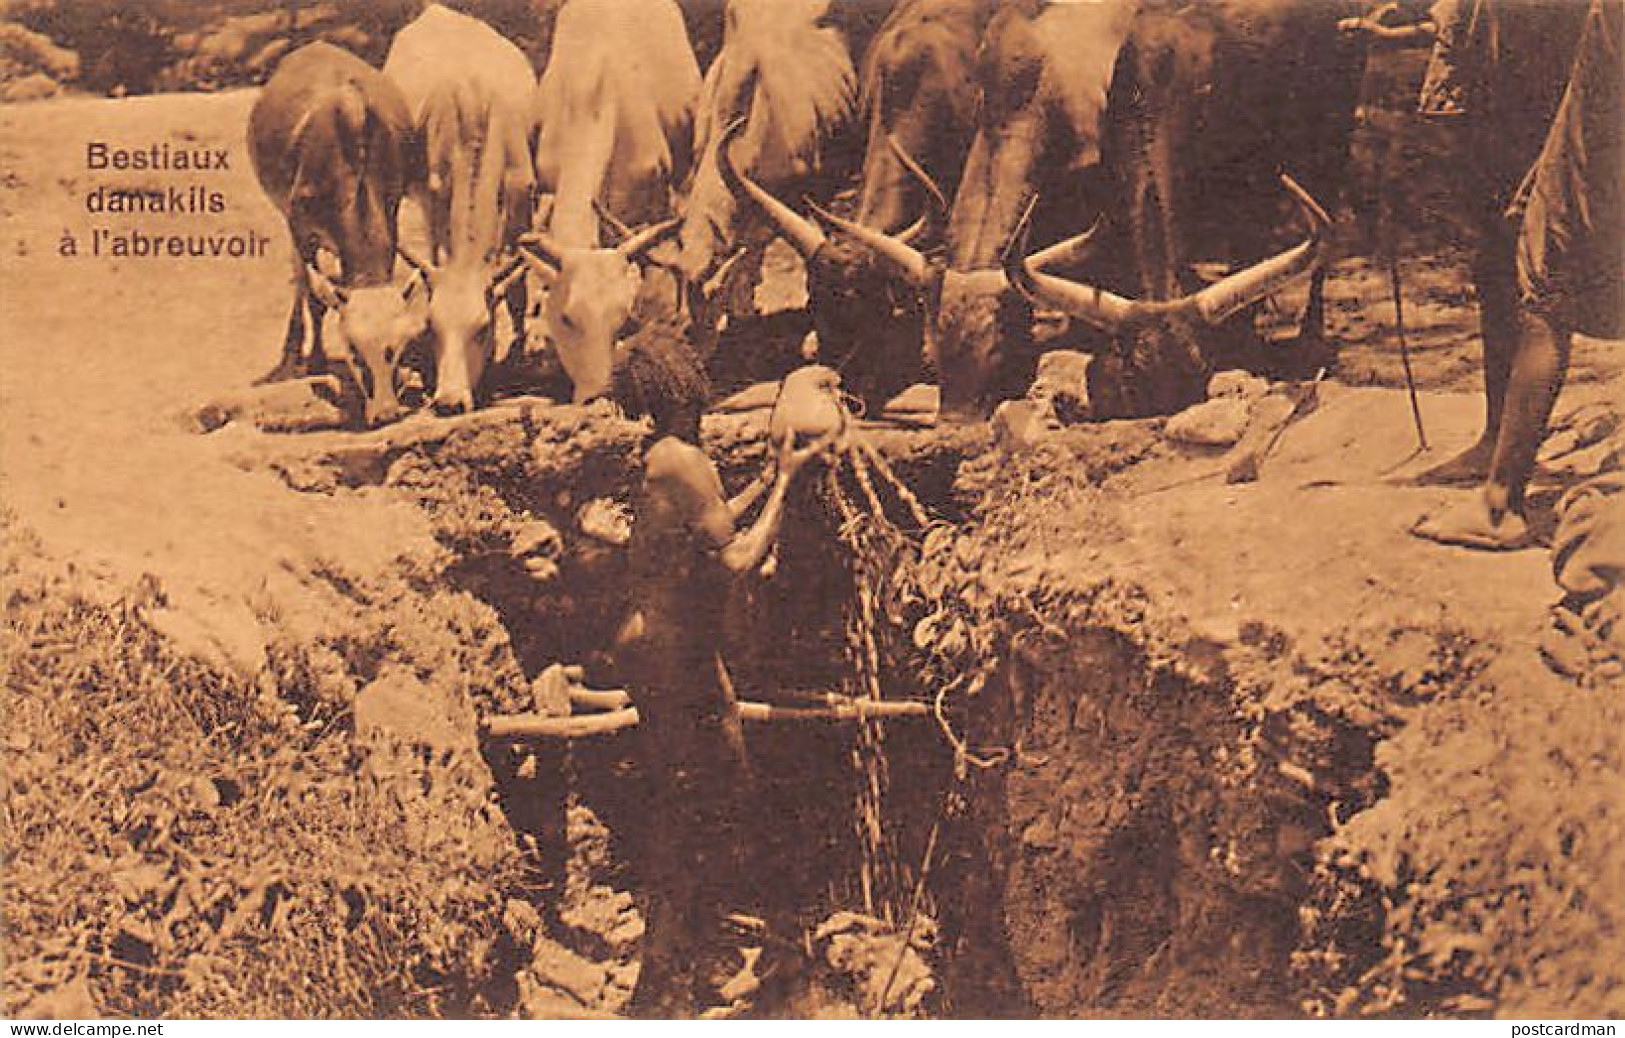 Ethiopia - Dankali Cattle At The Watering Hole - Publ. J. A. Michel 6883 - Etiopía